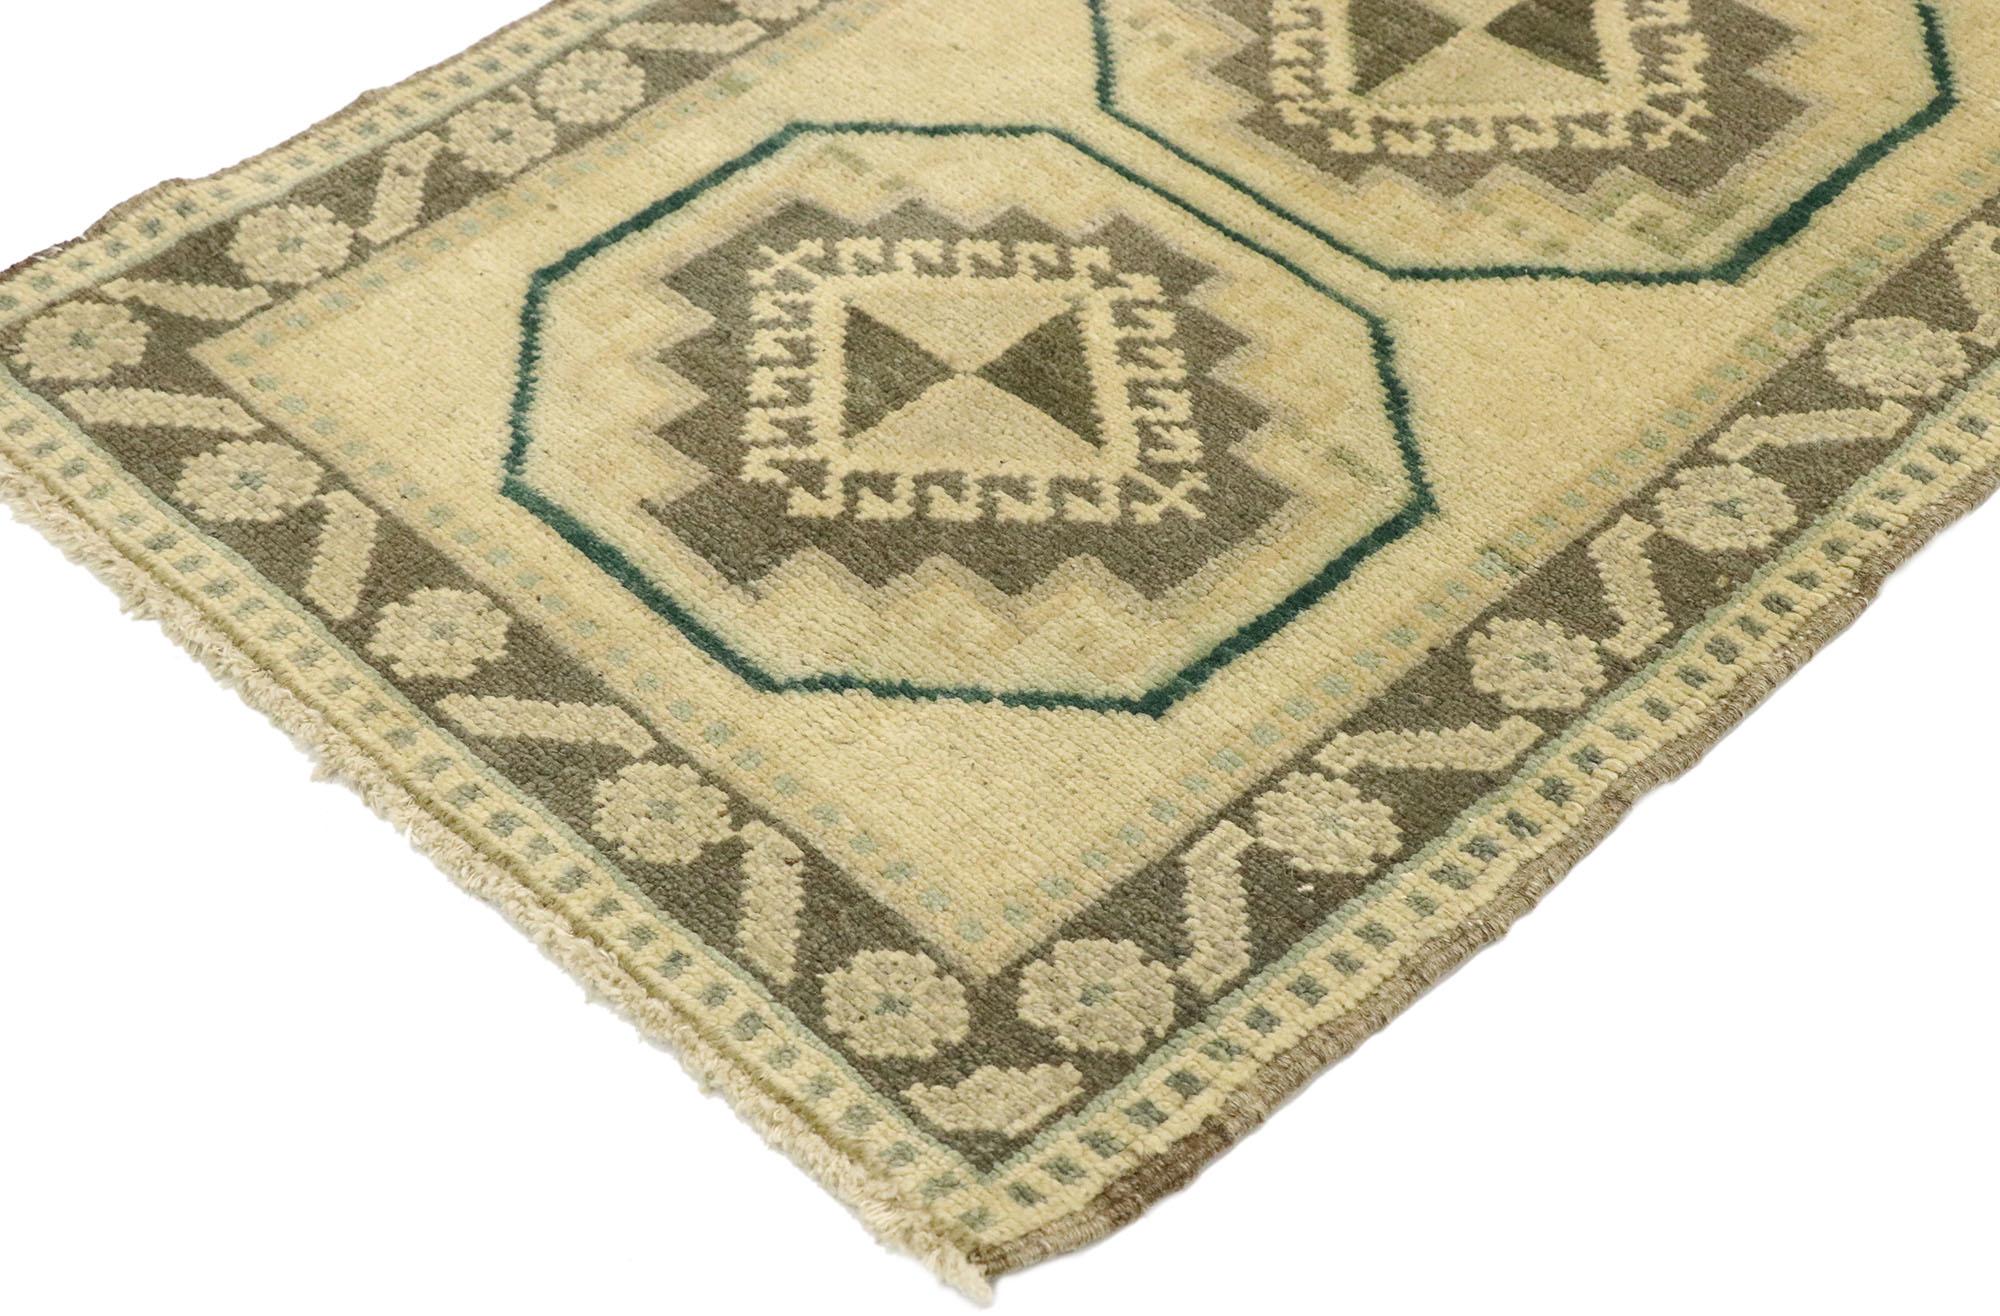 53011, vintage Turkish Oushak Yastik Scatter rug with neutral Southwestern desert boho style, small accent rug. Effortless beauty and simplicity meet tribal charm with a neutral southwestern boho chic style in this hand knotted wool vintage Turkish